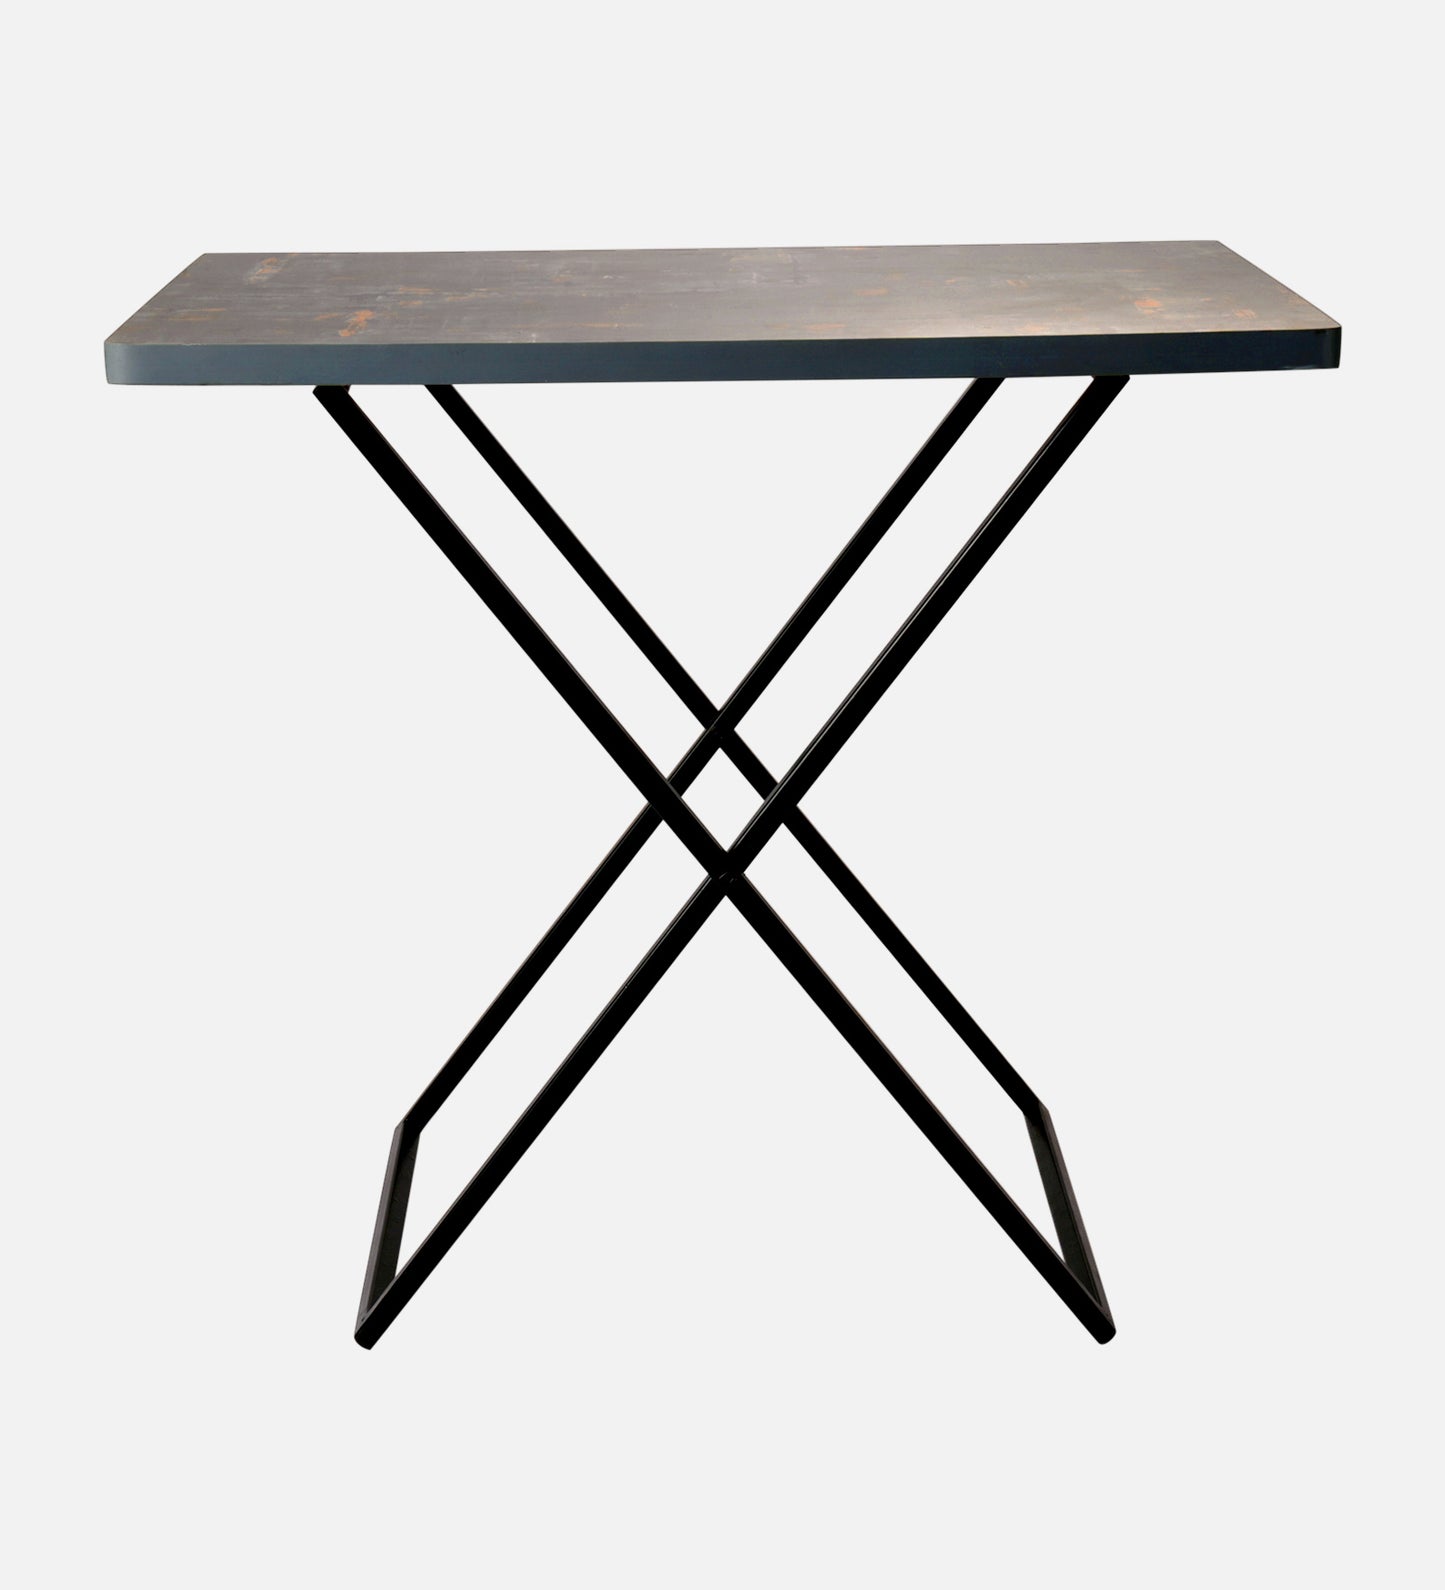 Bohemian Tint Criss Cross Side Tables, Writing Tables, Wooden Tables, Kids Tables, End Tables Living Room Decor by A Tiny Mistake